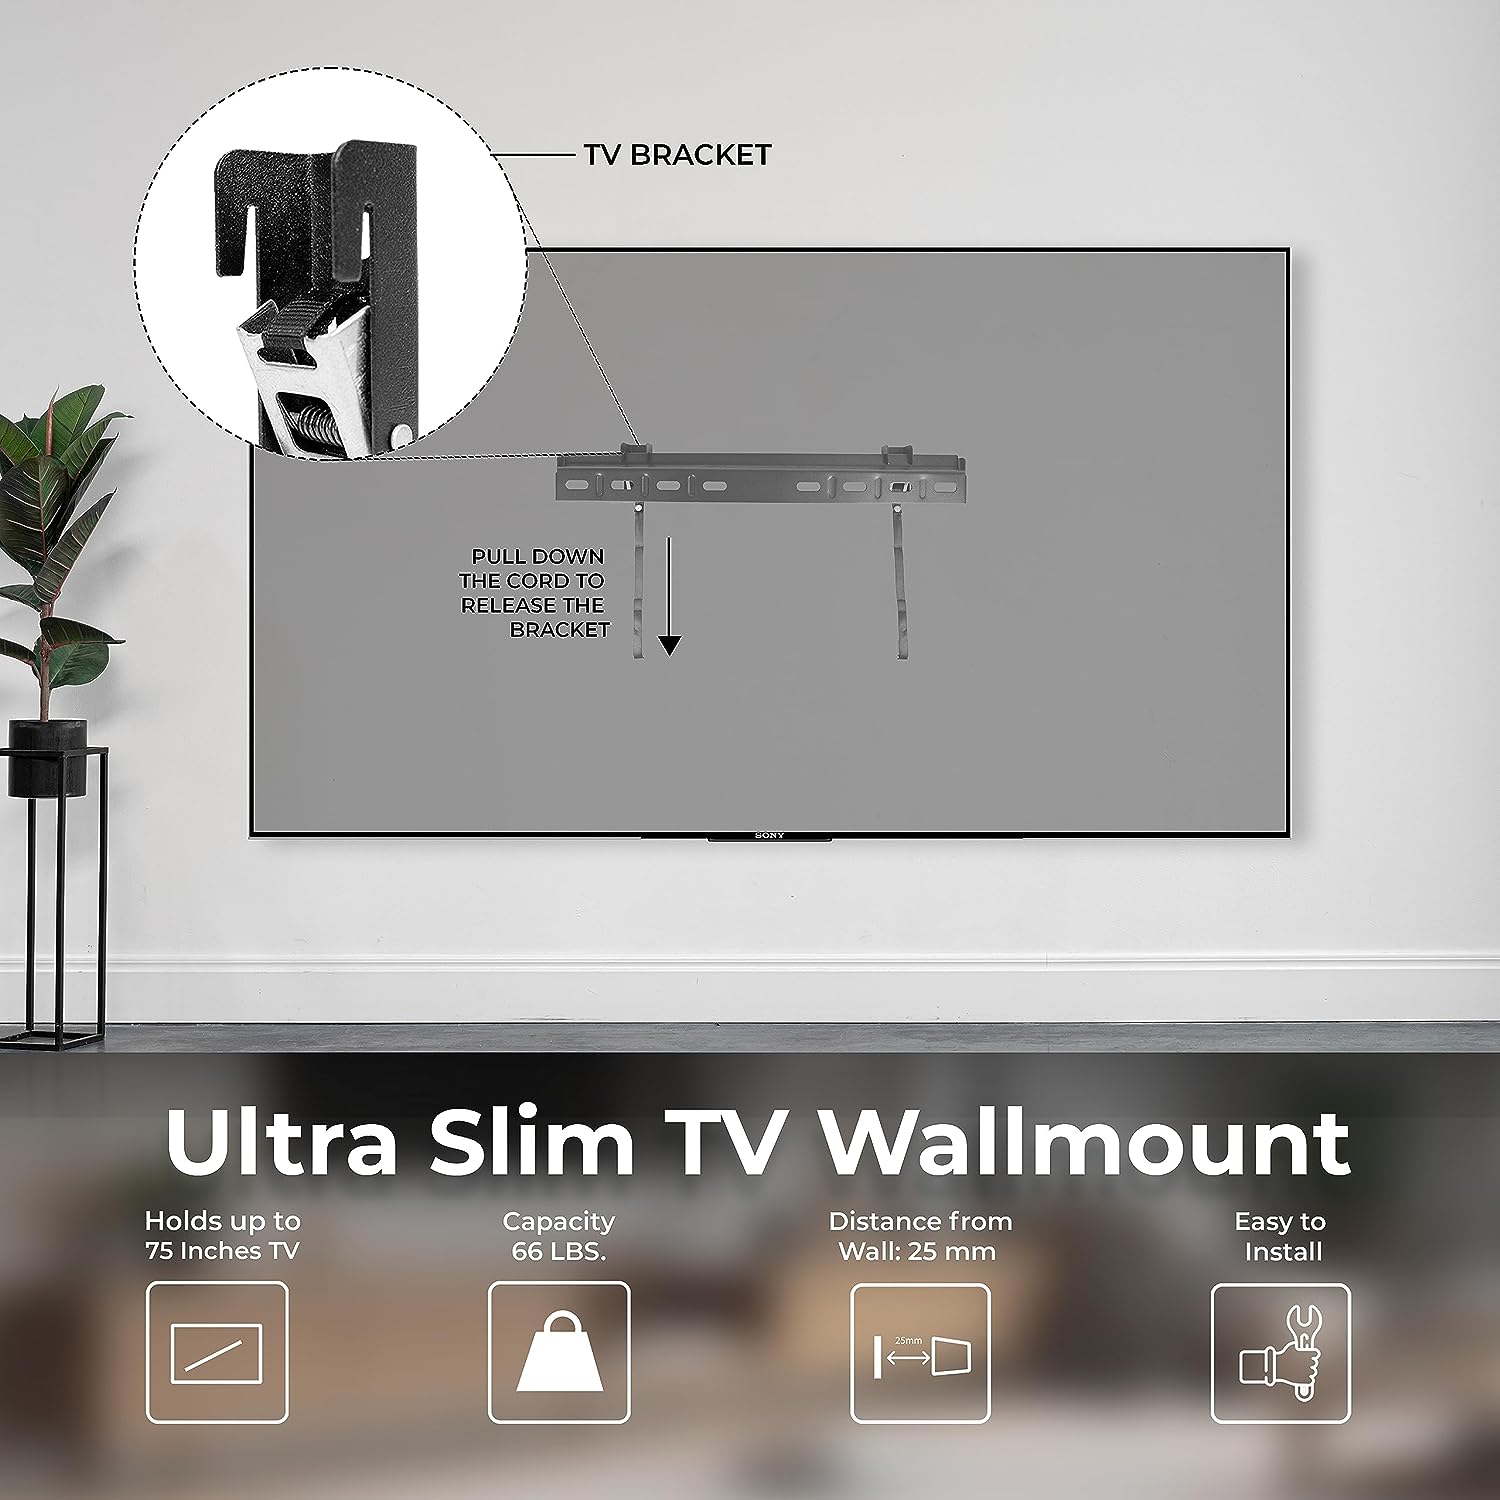 ONN 32-Inch Class HD 720p Smart TV + Free Wall Mount with Wi-Fi Connectivity and Mobile App | Flat Screen TV | Compatible with Home Kit | Alexa and Google Assistant (Renewed)